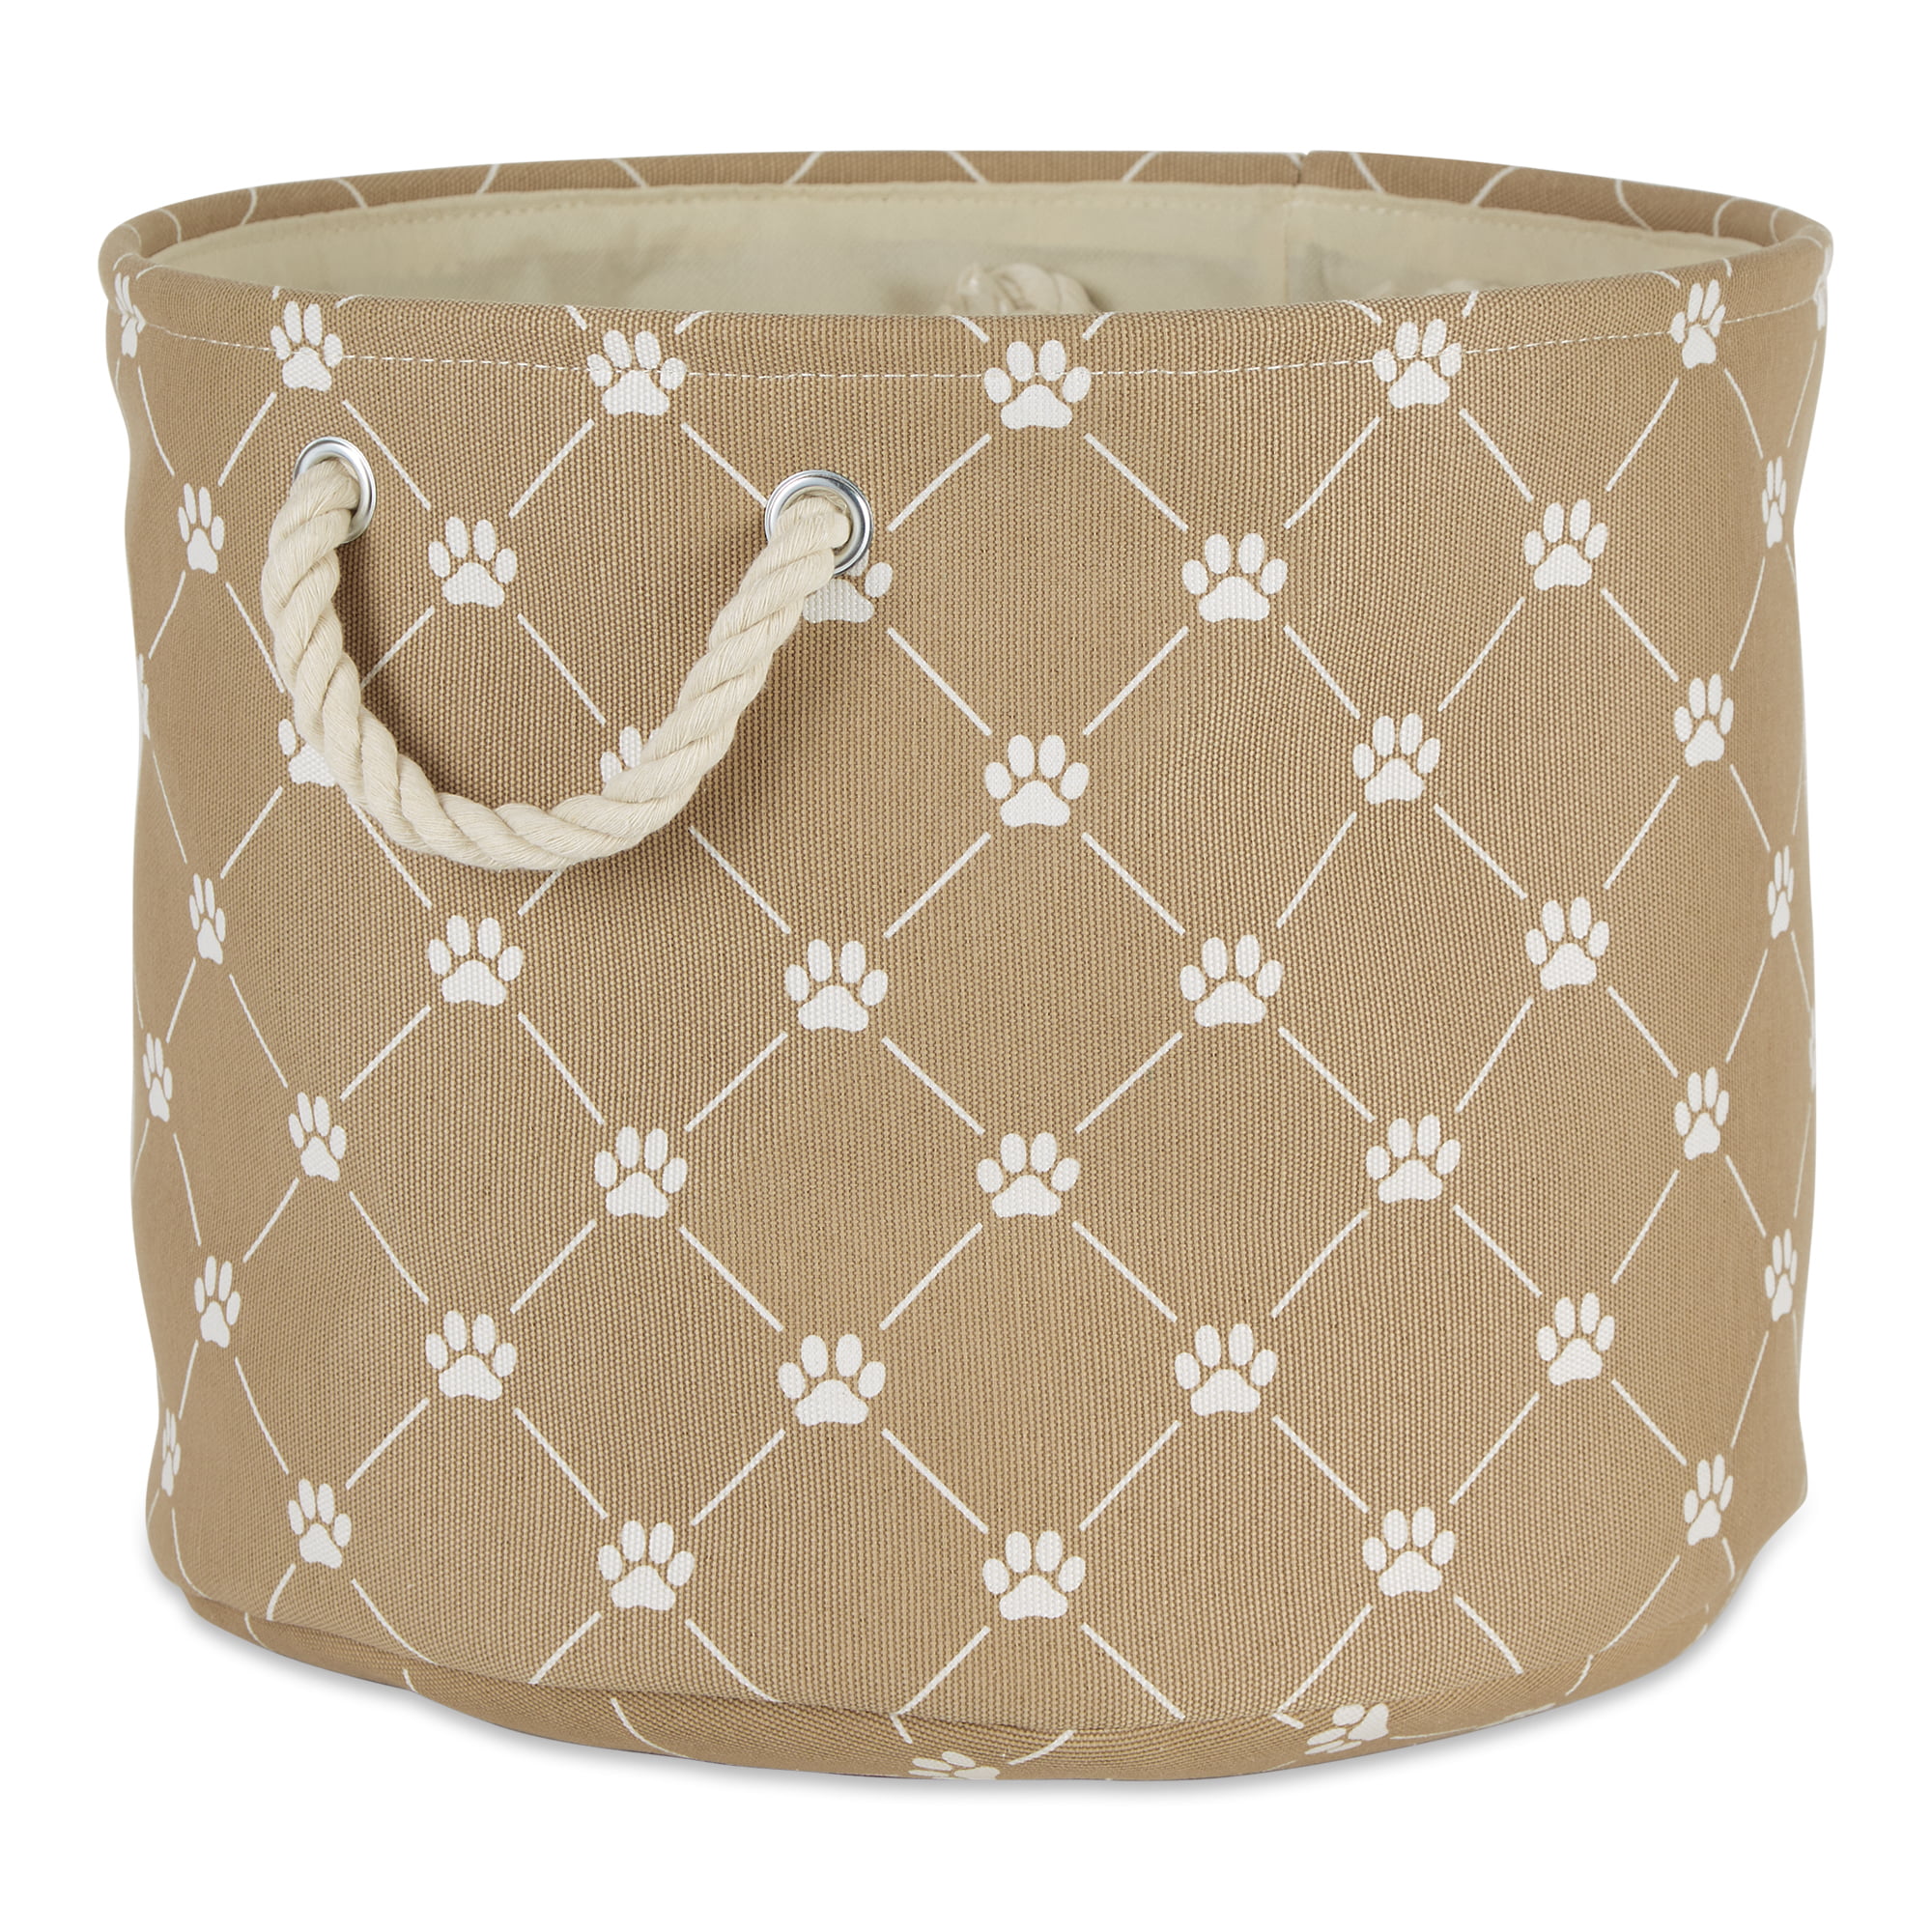 Picture of Design Imports CAMZ14246 Polyester Trellis Paw Round Pet Bin, Taupe